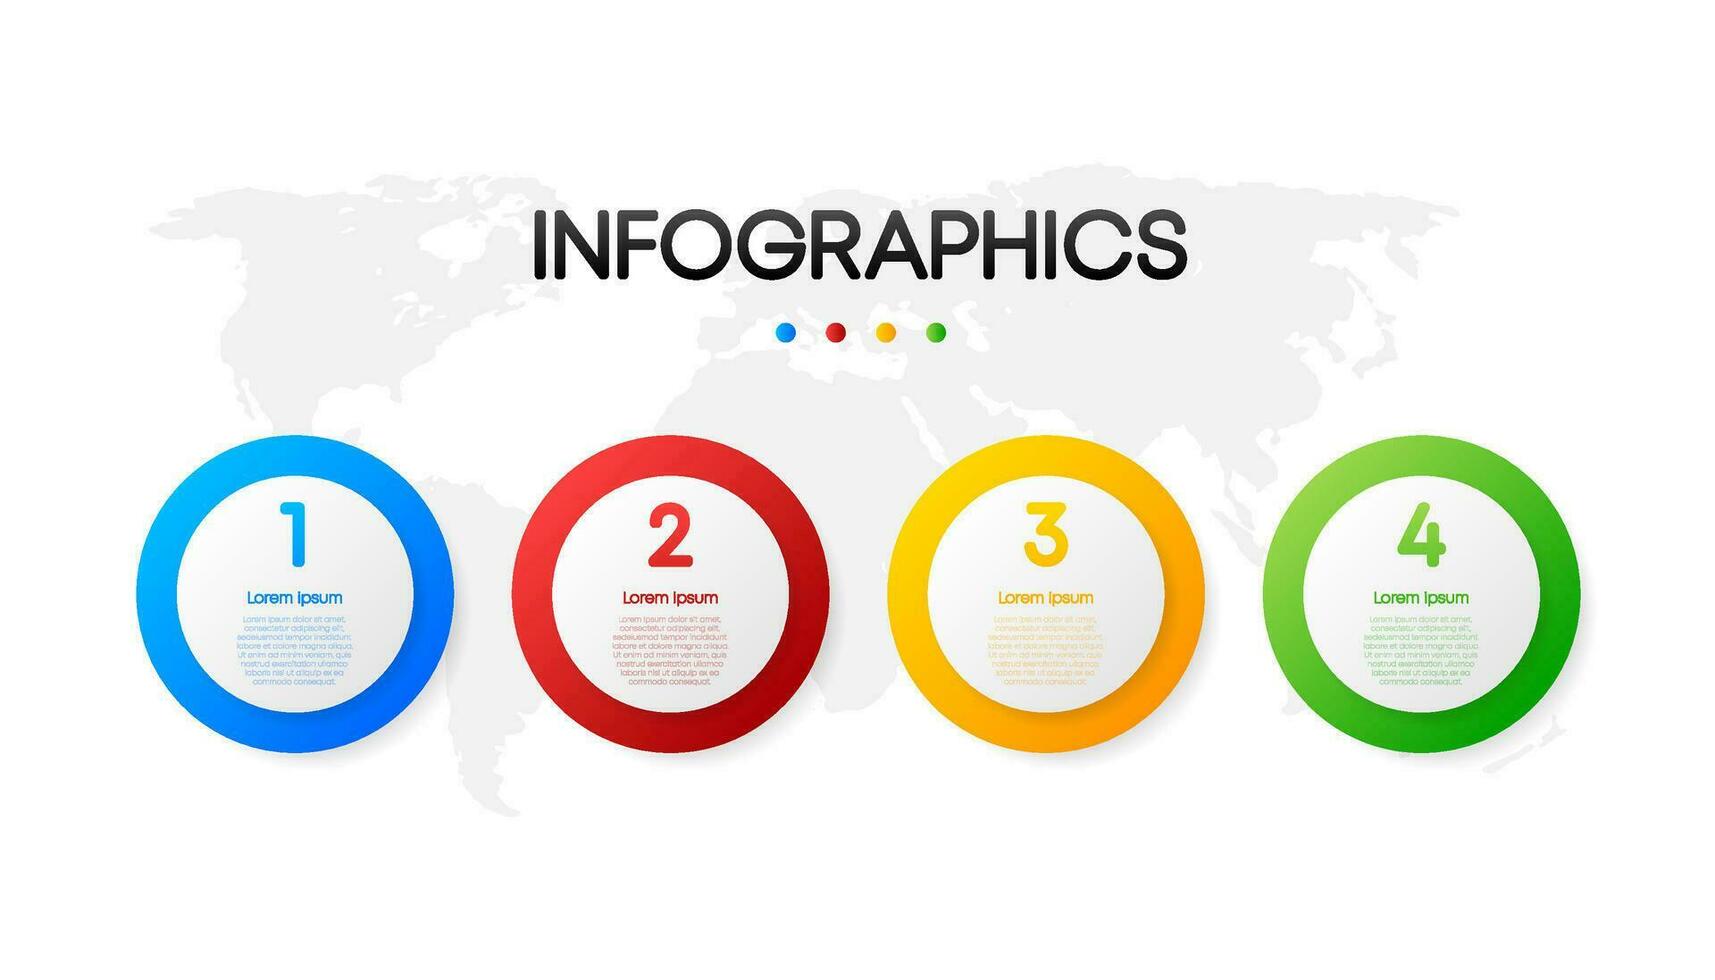 Business infographic, data visualization. Square frame. Simple infographic design template. Vector illustration.